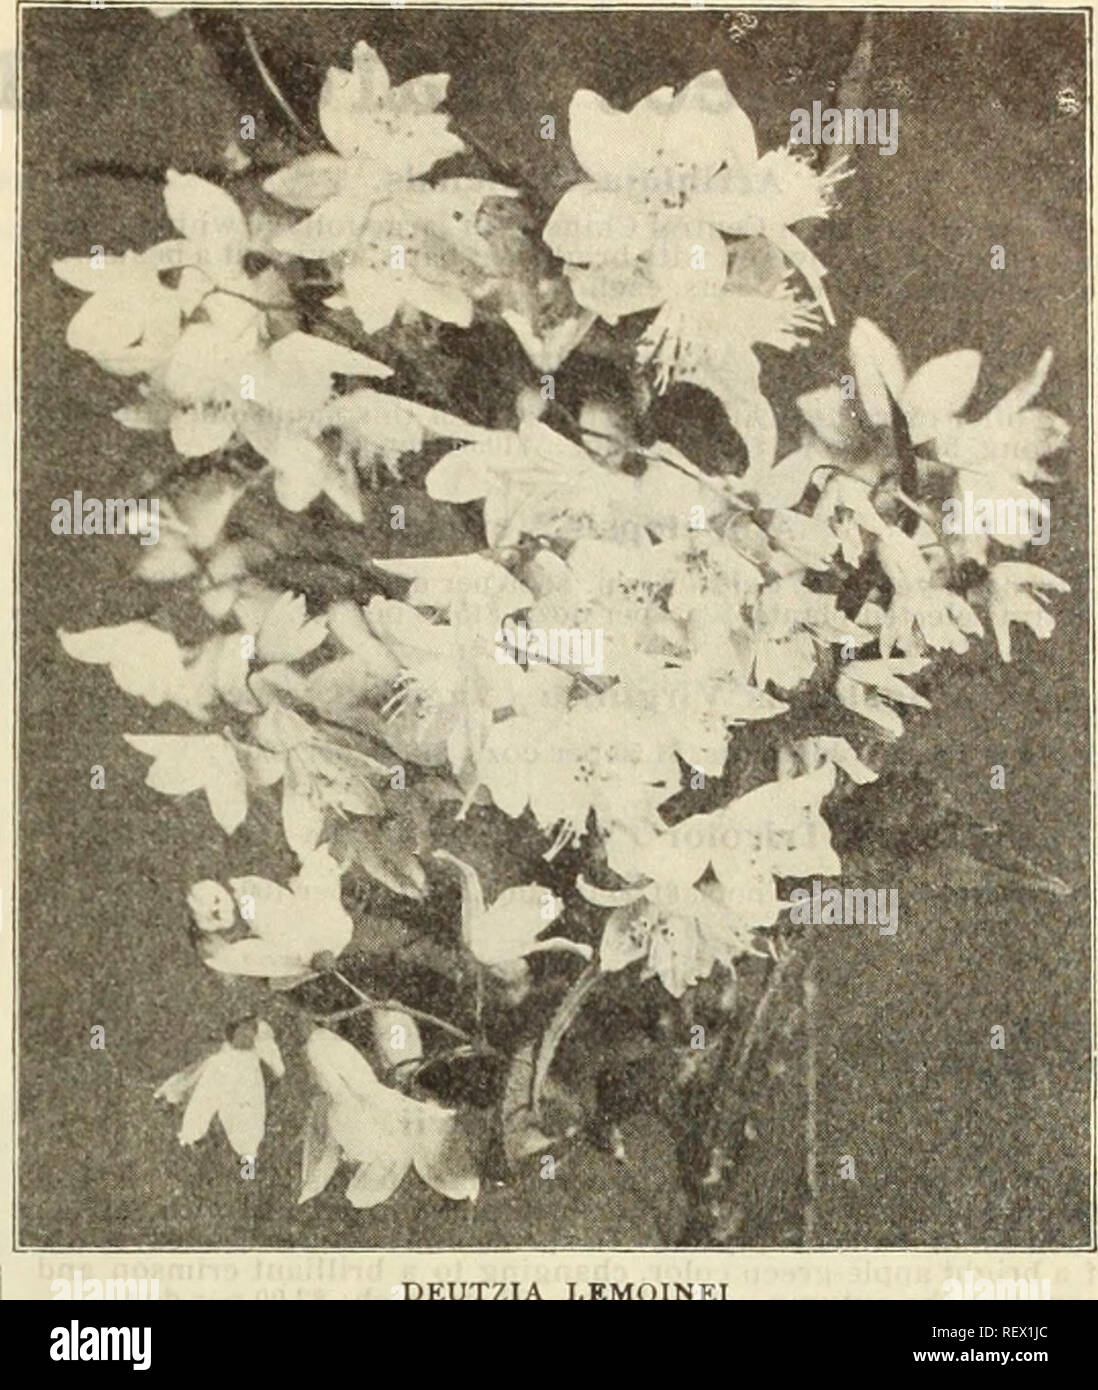 . Dreer's wholesale price list : seeds, plants, bulbs, etc. Bulbs (Plants) Catalogs; Flowers Seeds Catalogs; Vegetables Seeds Catalogs; Nurseries (Horticulture) Catalogs. HENRY A. DREER, PHILADELPHIA* PA., WHOLESALE PRICE LIST 55 Rhododendron Punctatum. A distinct native species of compact spreading habit, splendid for exposed positions, being- absolutely hardy, producing masses of medium sized purplish-rose colored flowers. 75 cts each. Golden Variegated Privet. ( Li&lt;;ustrum Ovalifolium Aureum.) A fine lot of bushy plants of this useful, ornamental, golden variegated shrub, 18 to 24 inches Stock Photo